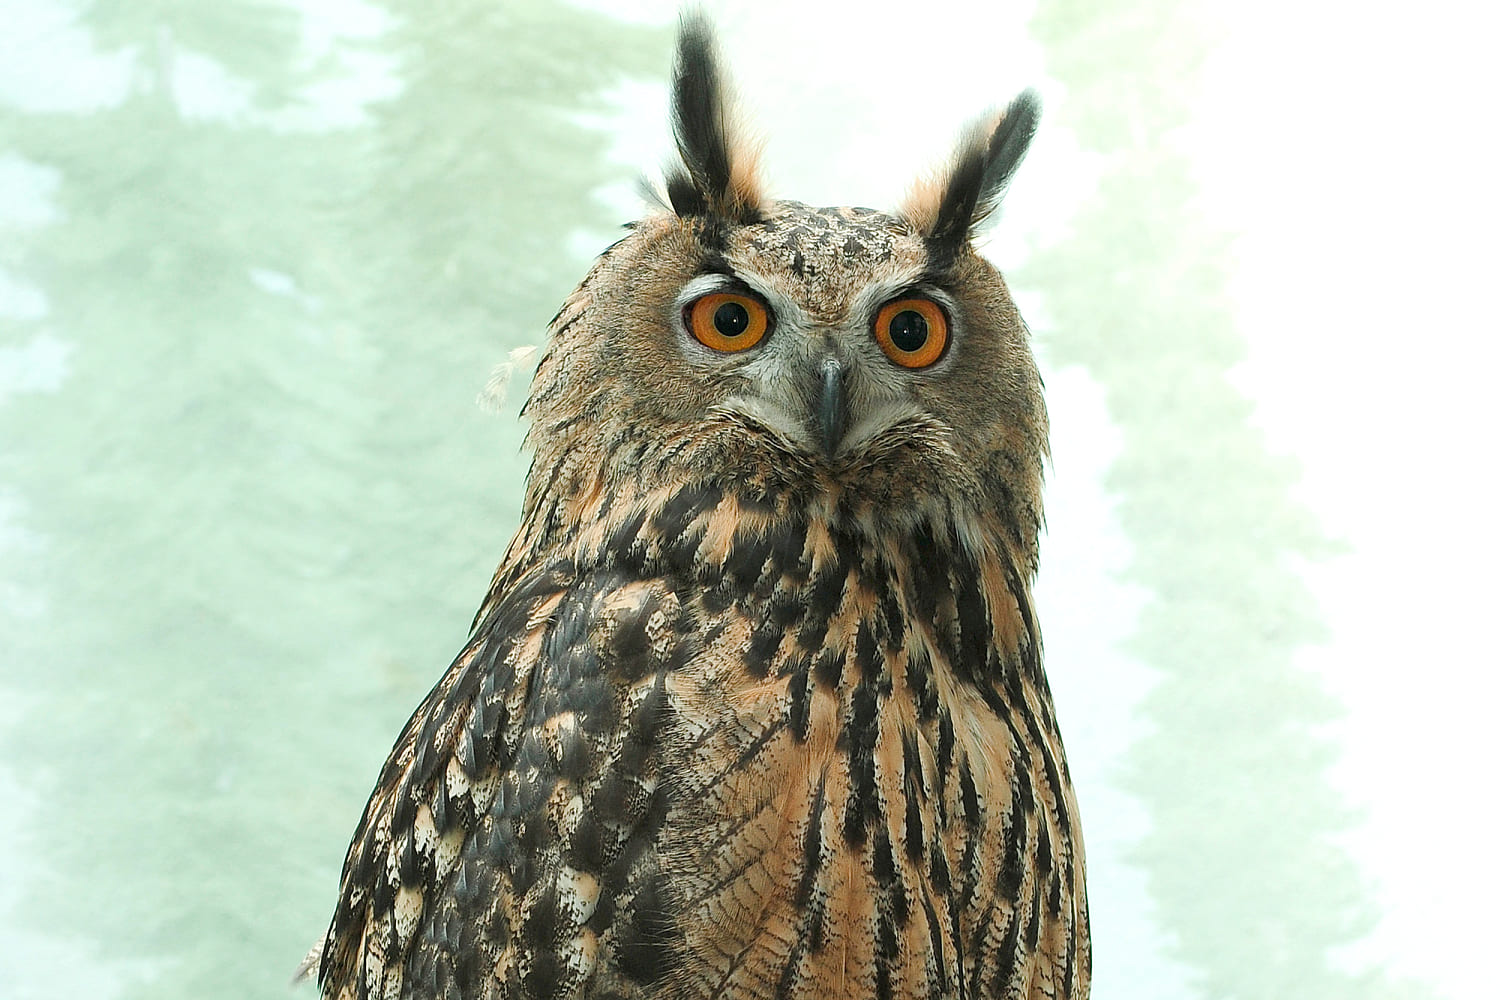 Flaco, famous Central Park Zoo owl who had been flying free for a year, has died